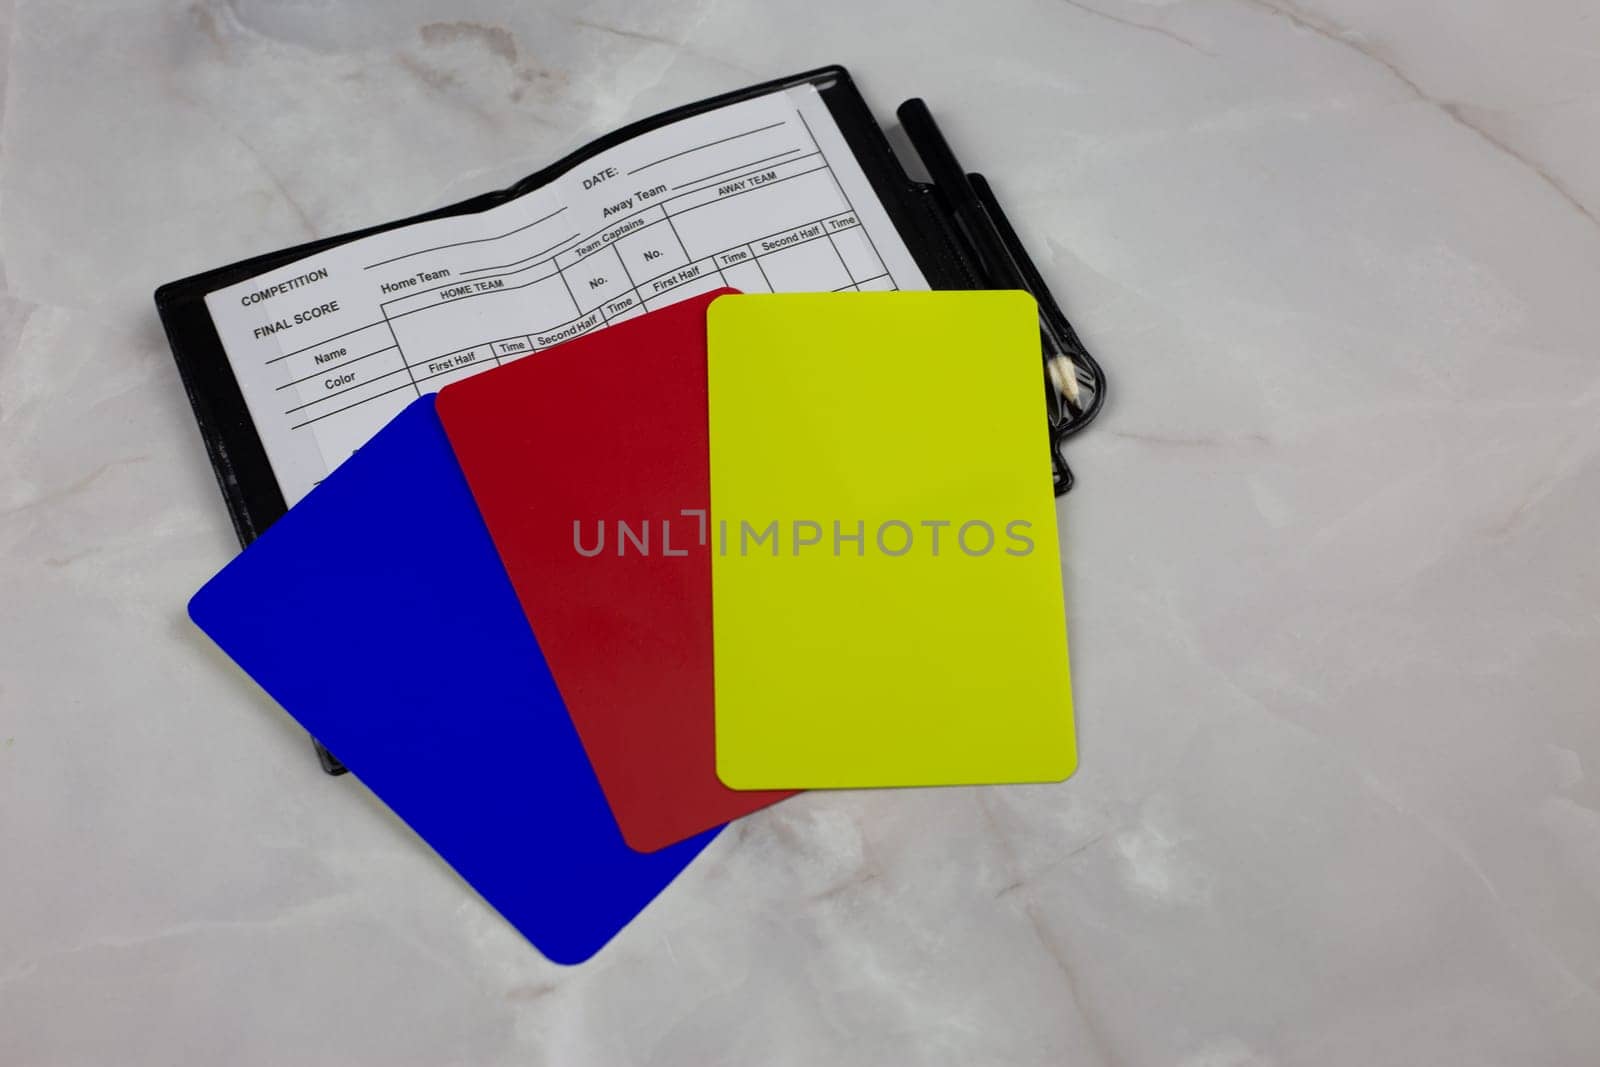 Football referee set for chest pocket, match chronology notepad and set of cards in different colors, blue, red, yellow football cards